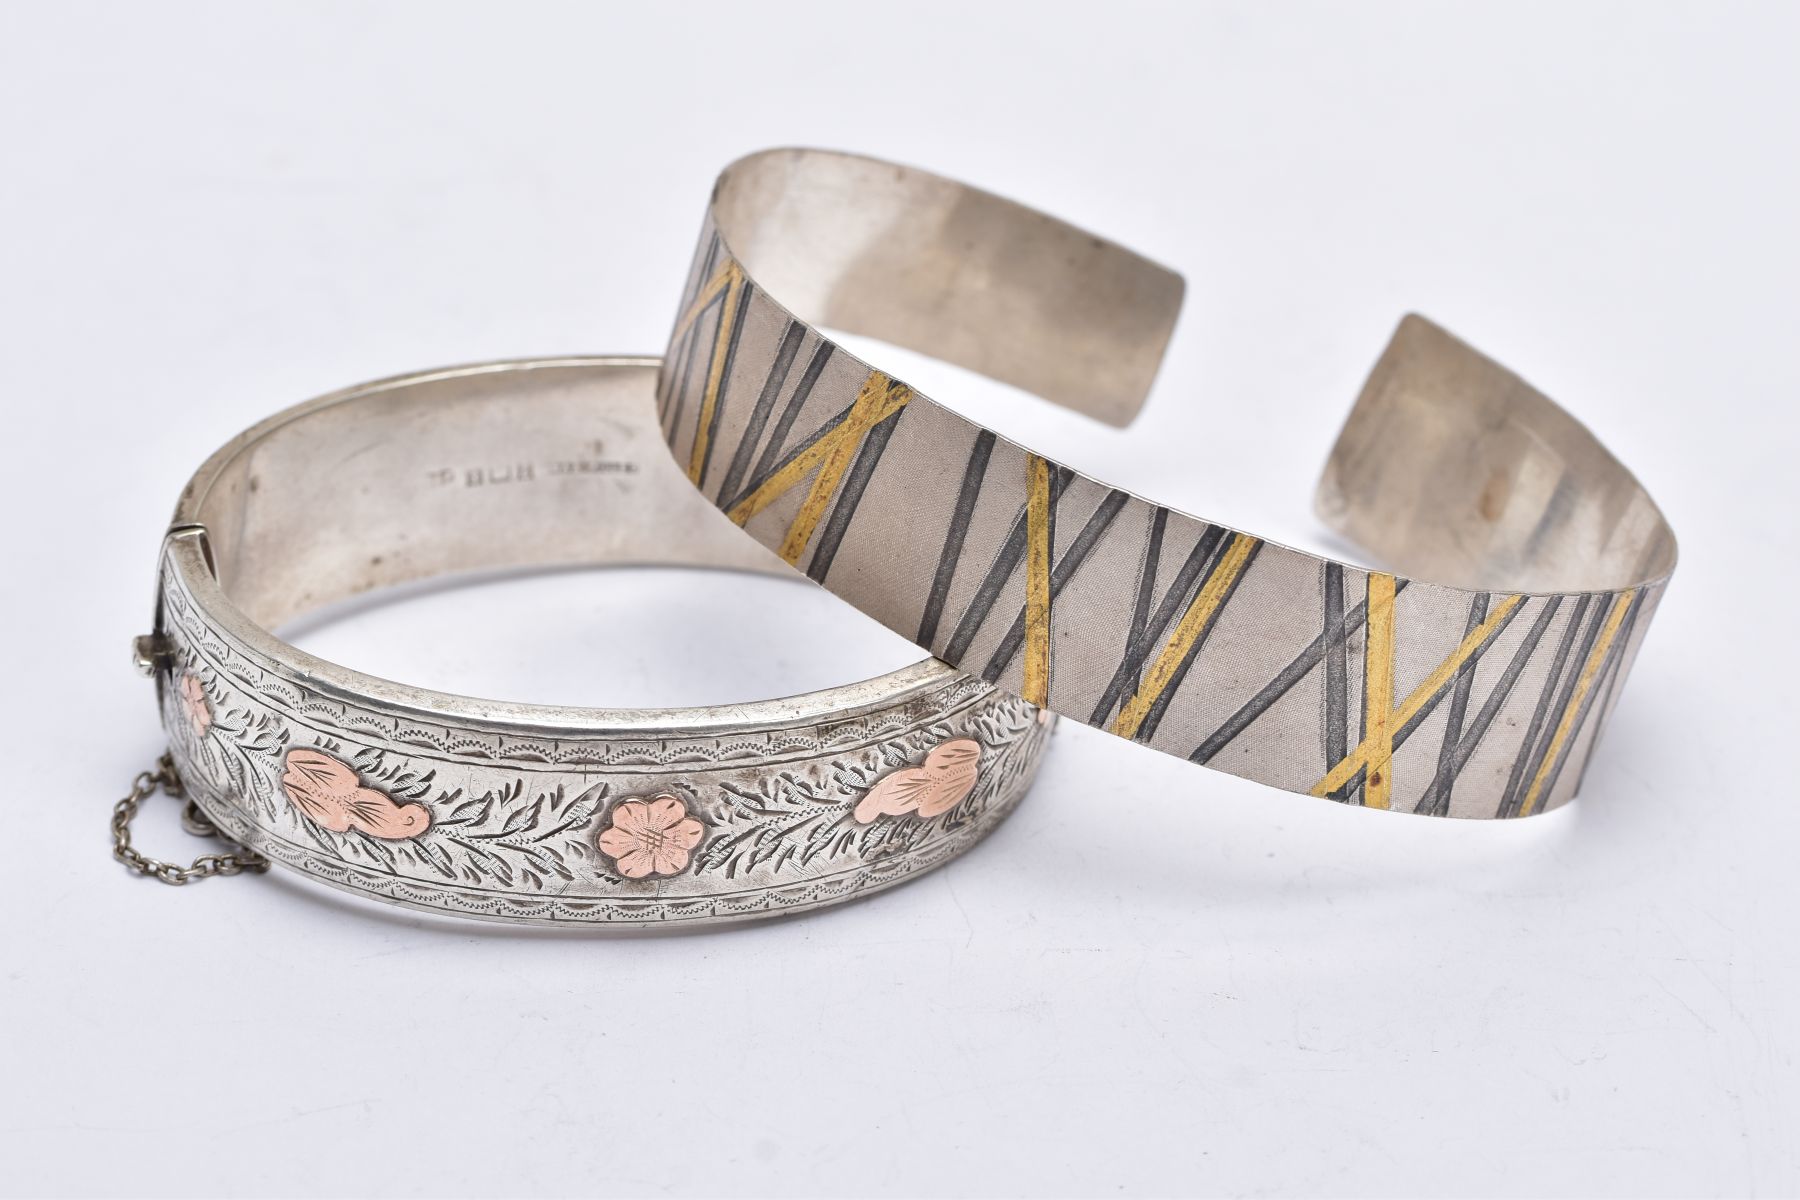 A SILVER BANGLE AND A WHITE METAL CUFF, the silver hinged bangle, with a decorative rose gold tone